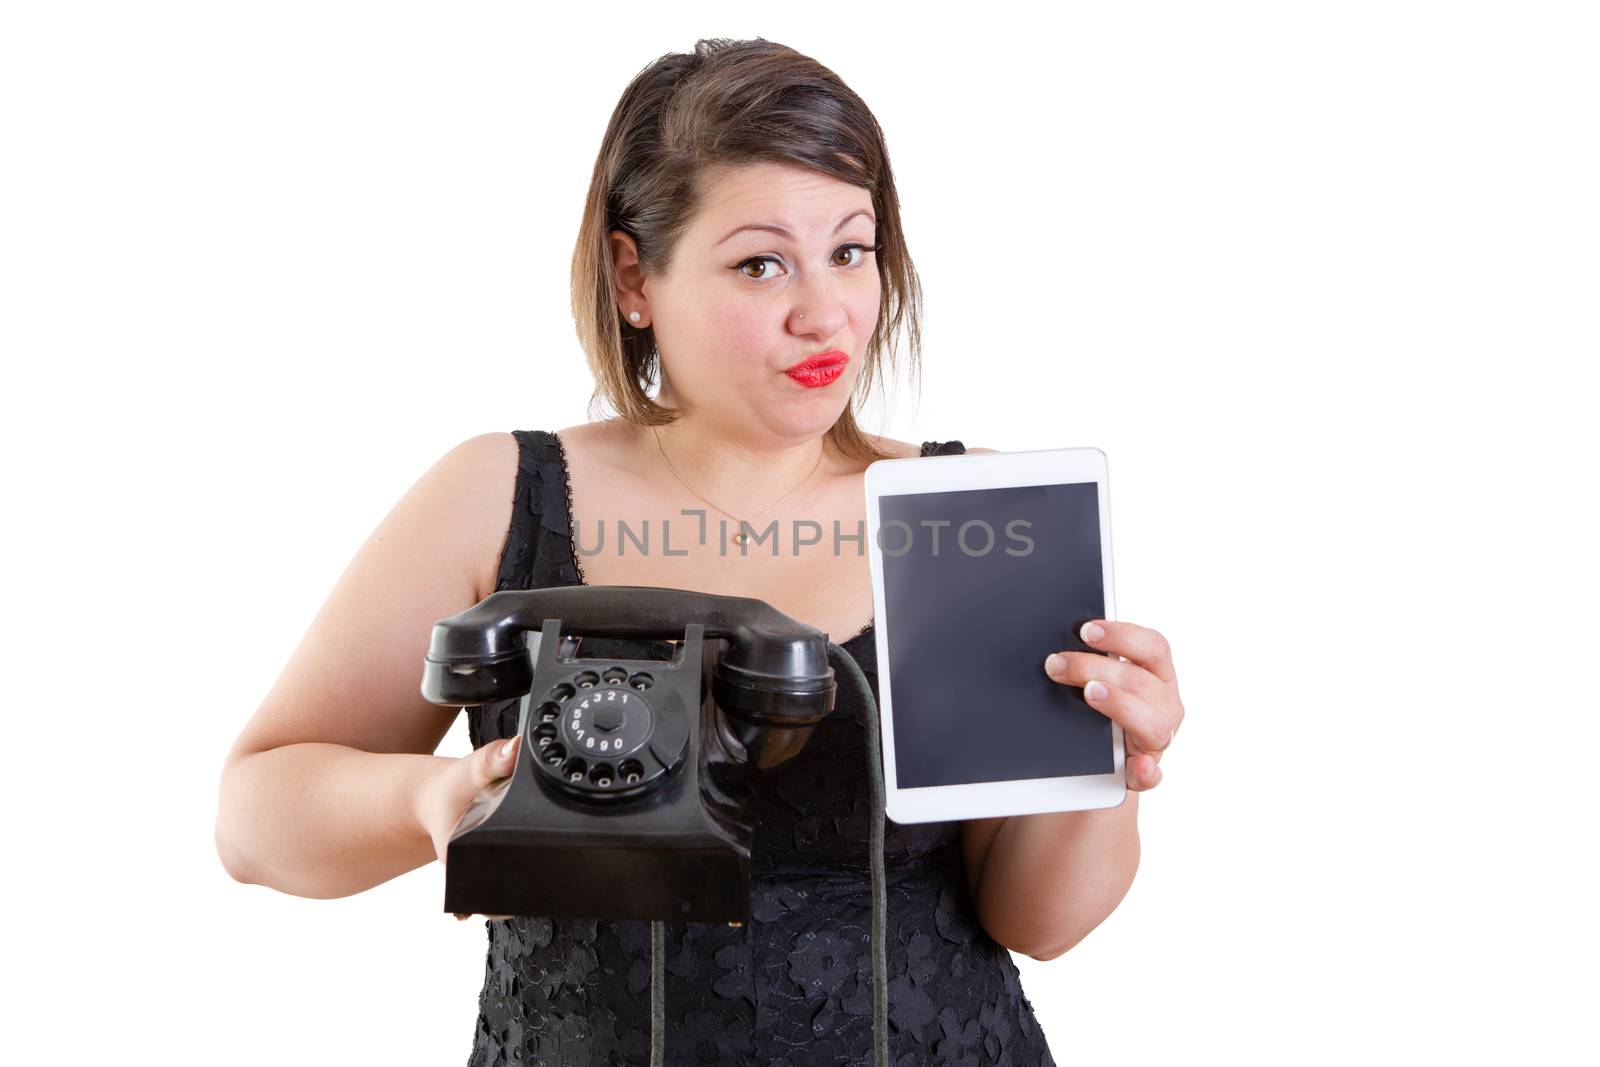 Charismatic woman comparing old and modern technology holding up an old-fashioned rotary land line telephone instrument and a tablet computer in a communications concept, isolated on white